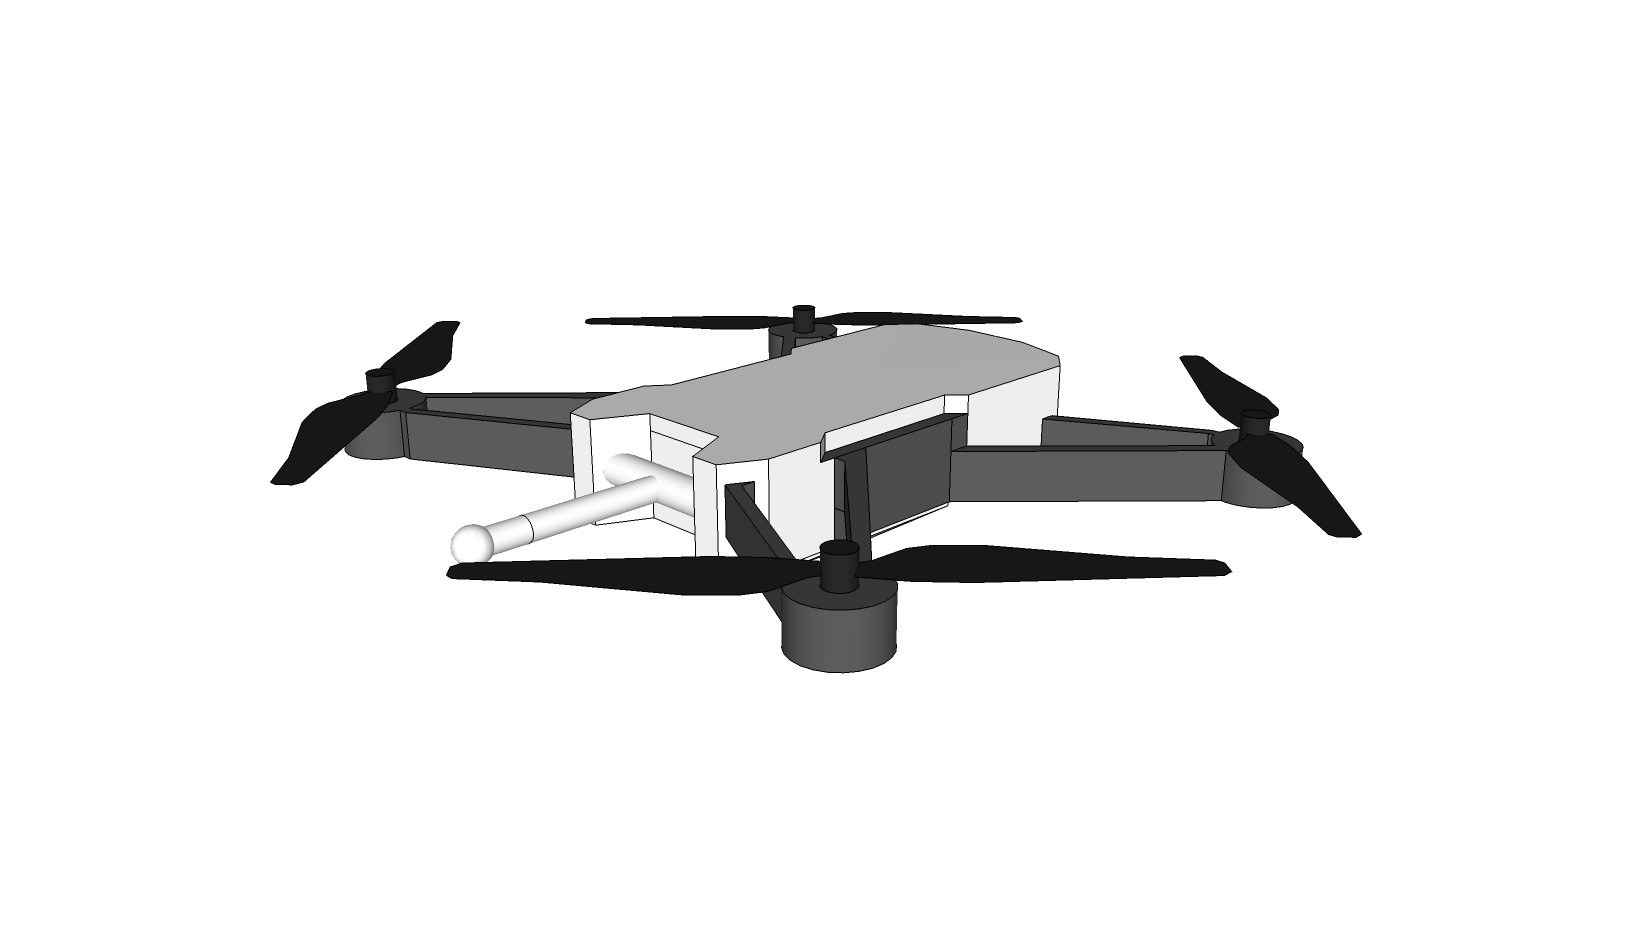 File:Drone with collection path.jpg